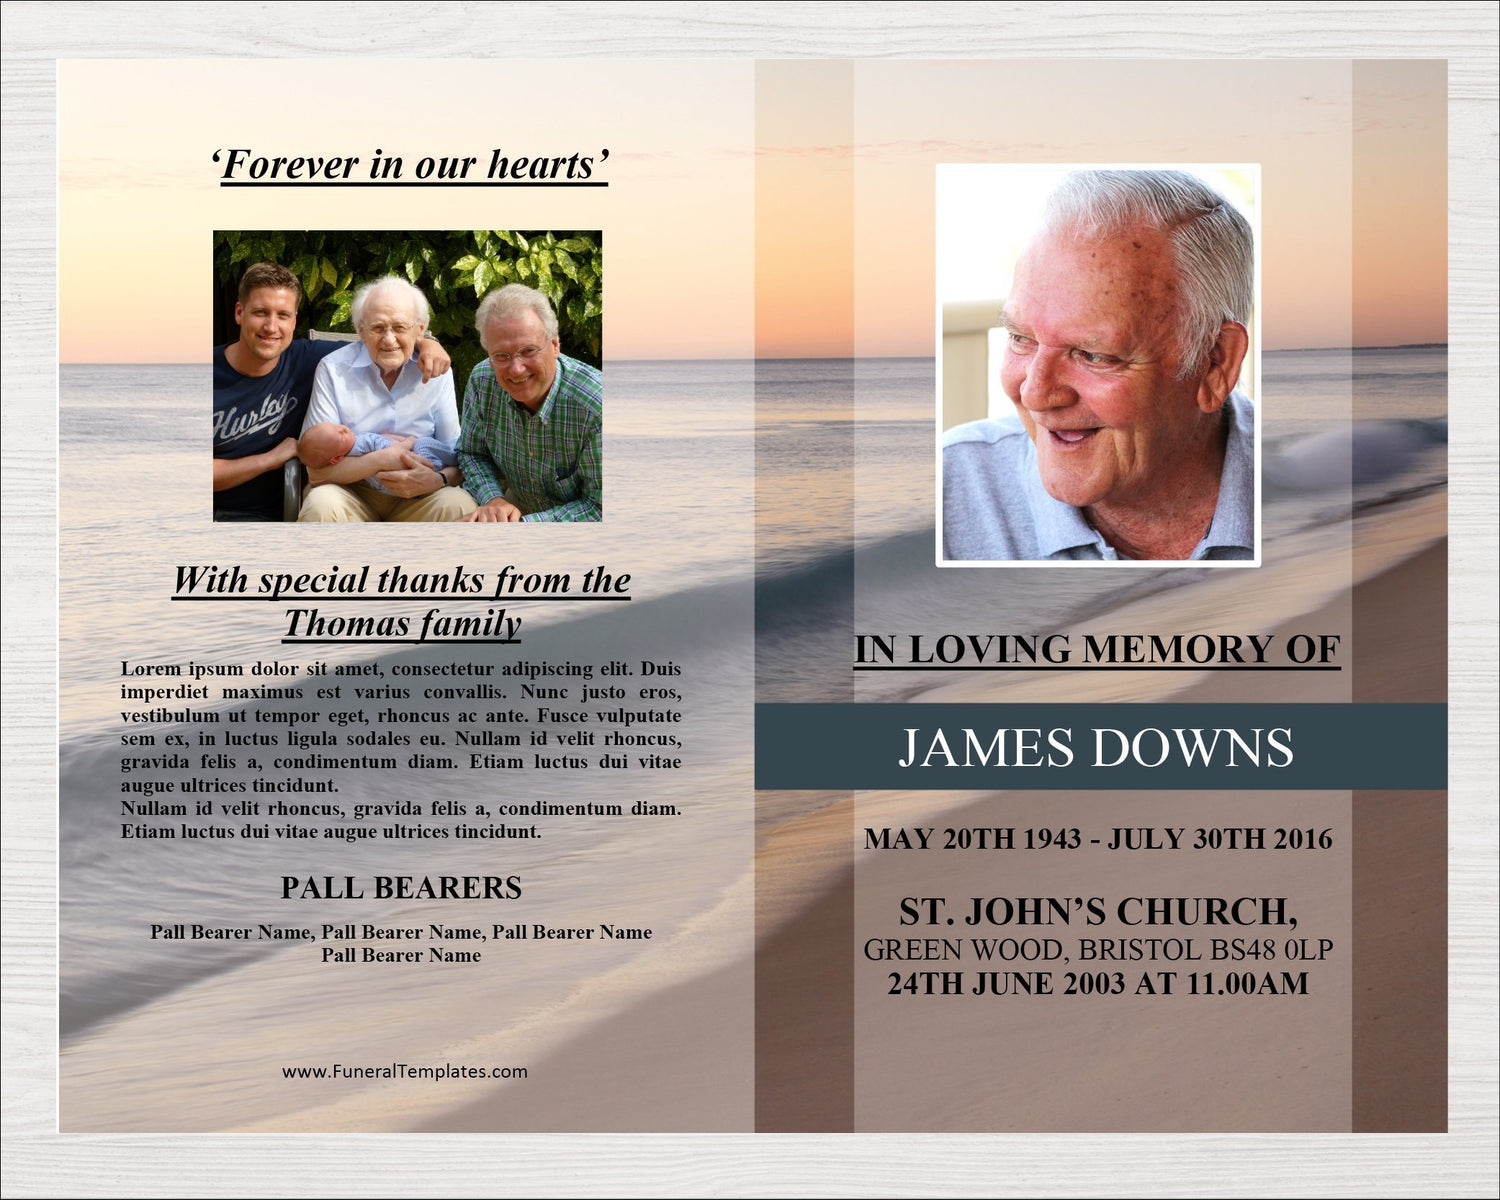 8 Page Beach Wave Funeral Program Template